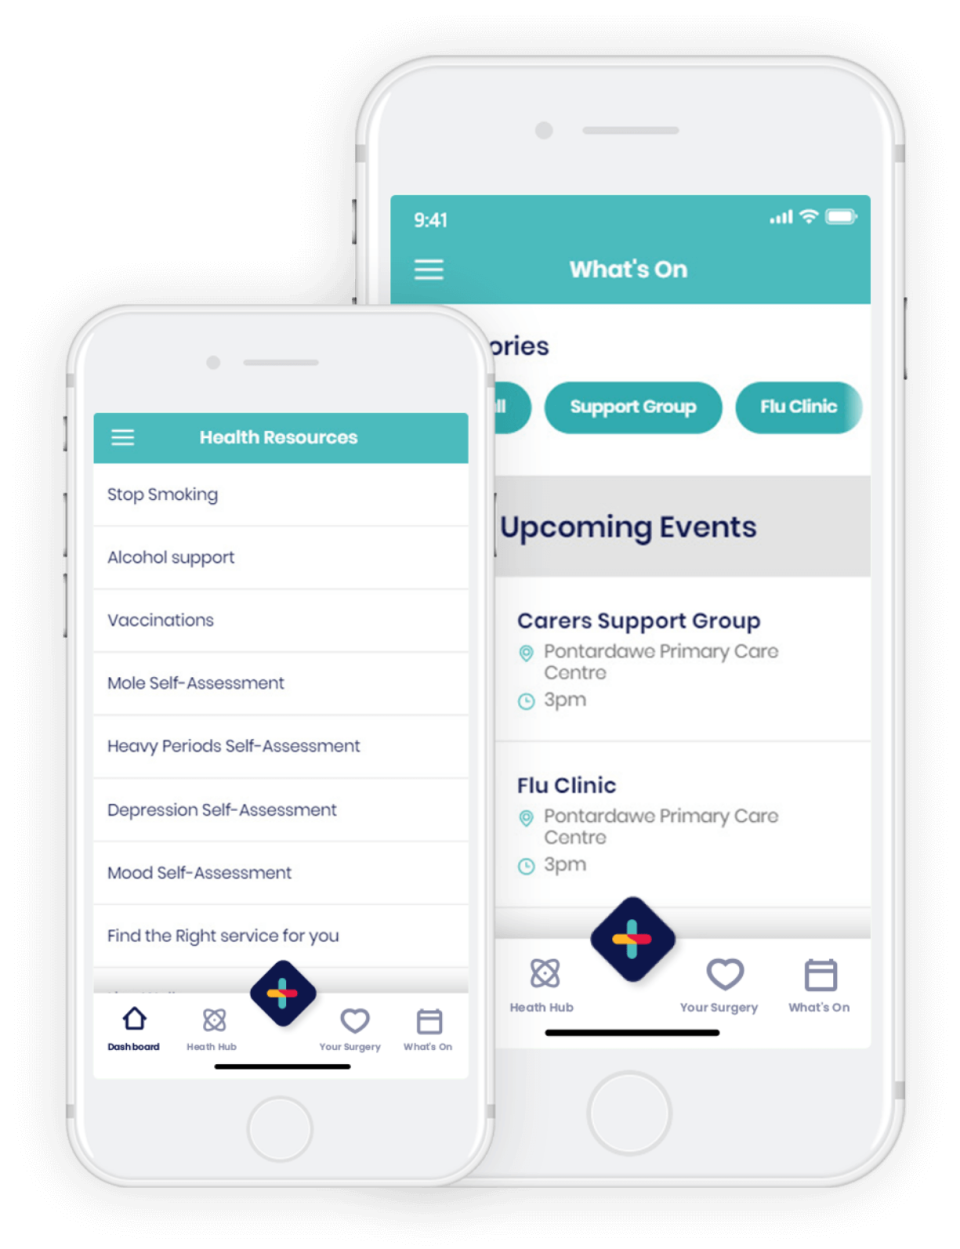 <ul>
<li><strong>Send notifications to your practice population through push notifications</strong></li>
<li><strong>Provide practice information</strong></li>
<li><strong>NHS Health Resources & Localised Services with self-referral</strong></li>
<li><strong>What’s on locally</strong></li>
</ul>